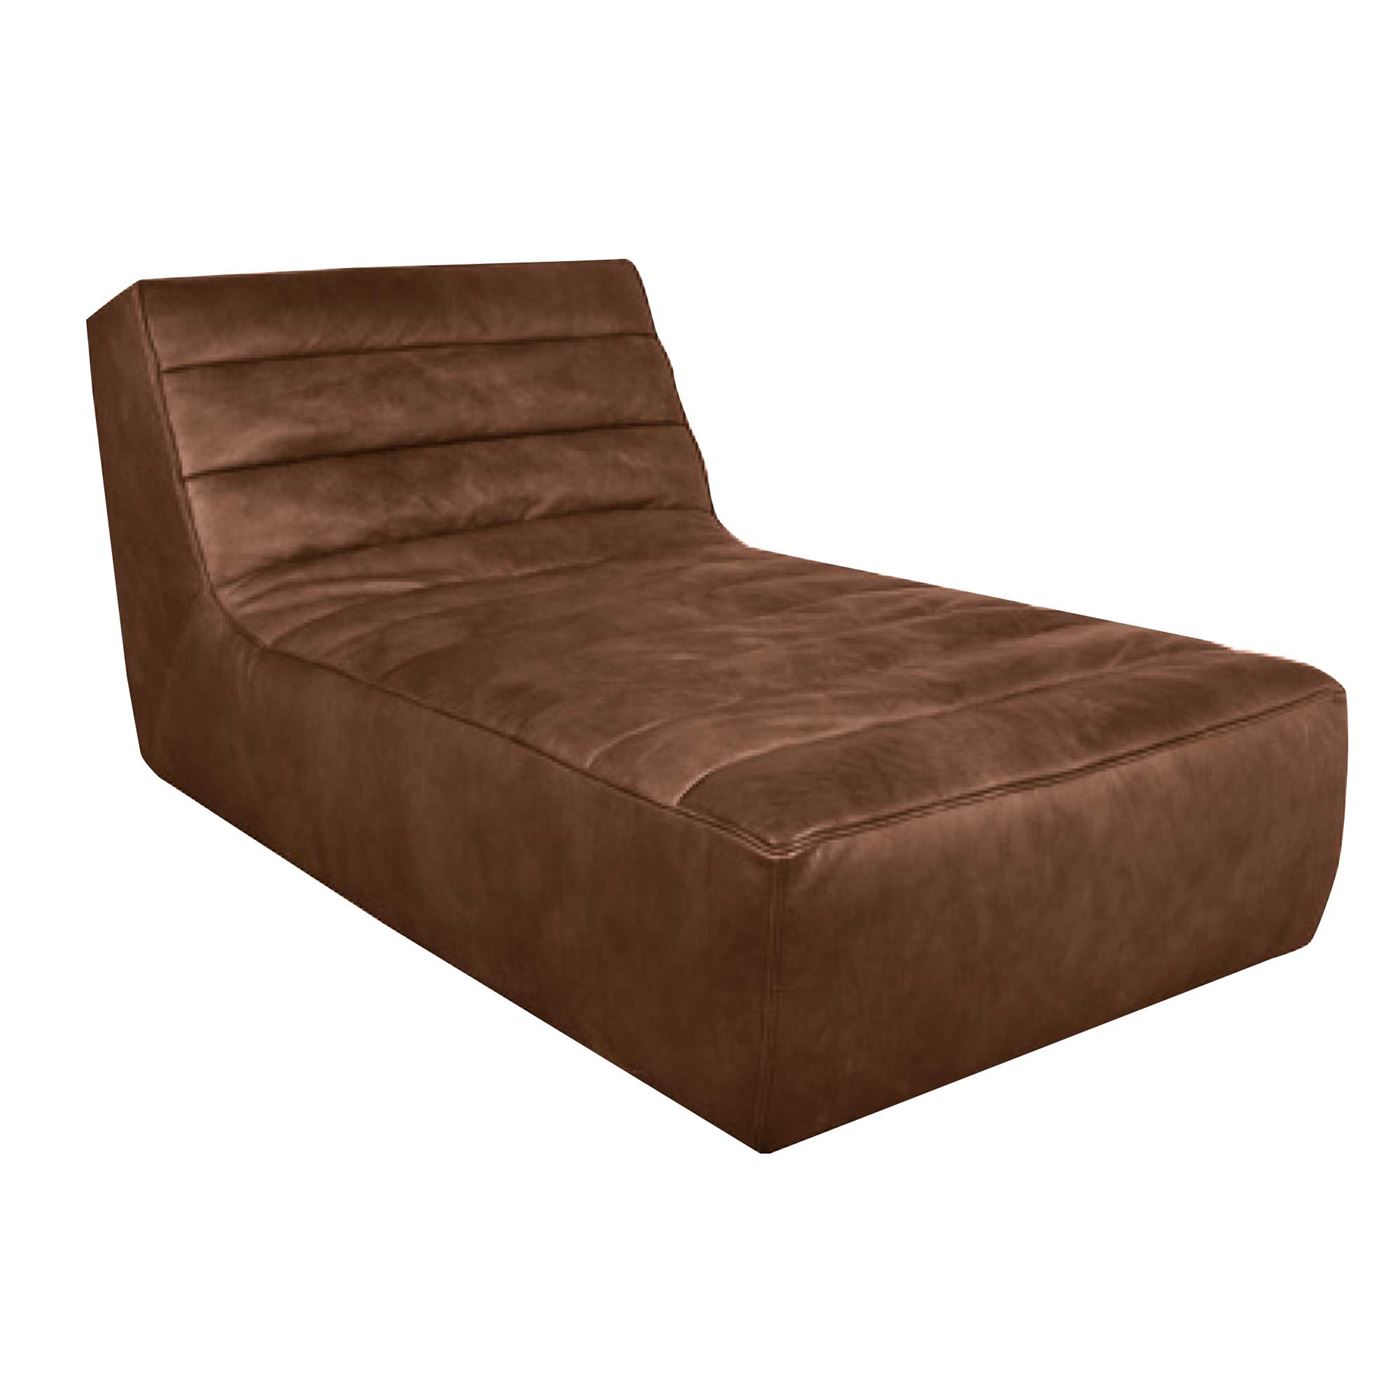 Timothy Oulton Shabby Sectional Chaise Modular Sofa, Brown Leather | Barker & Stonehouse